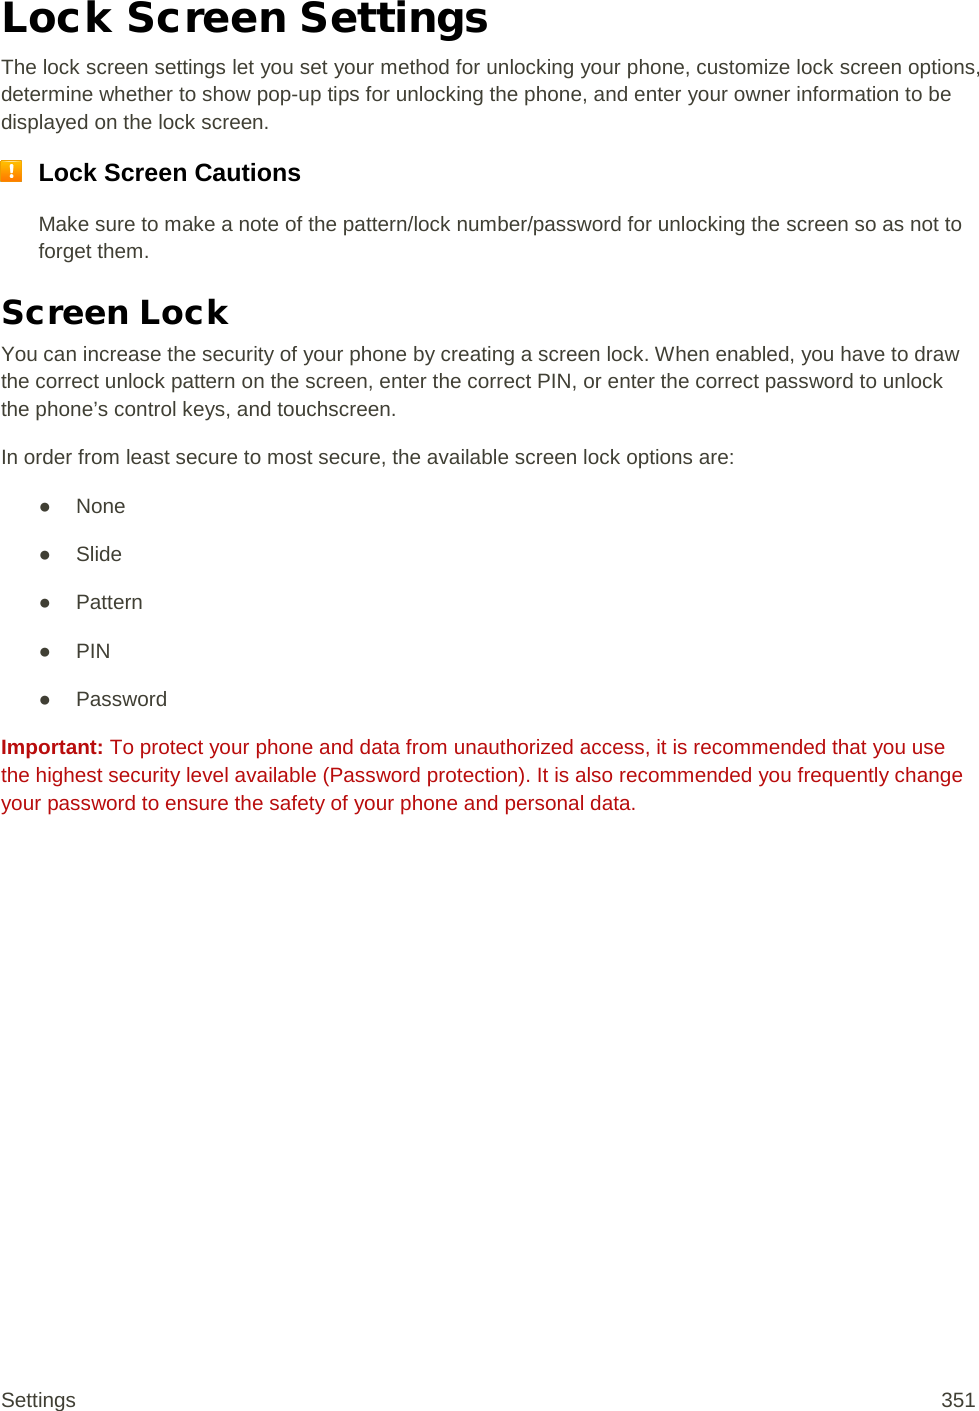 Lock Screen Settings The lock screen settings let you set your method for unlocking your phone, customize lock screen options, determine whether to show pop-up tips for unlocking the phone, and enter your owner information to be displayed on the lock screen.  Lock Screen Cautions Make sure to make a note of the pattern/lock number/password for unlocking the screen so as not to forget them. Screen Lock You can increase the security of your phone by creating a screen lock. When enabled, you have to draw the correct unlock pattern on the screen, enter the correct PIN, or enter the correct password to unlock the phone’s control keys, and touchscreen. In order from least secure to most secure, the available screen lock options are: ● None ● Slide ● Pattern ● PIN ● Password Important: To protect your phone and data from unauthorized access, it is recommended that you use the highest security level available (Password protection). It is also recommended you frequently change your password to ensure the safety of your phone and personal data. Settings 351 